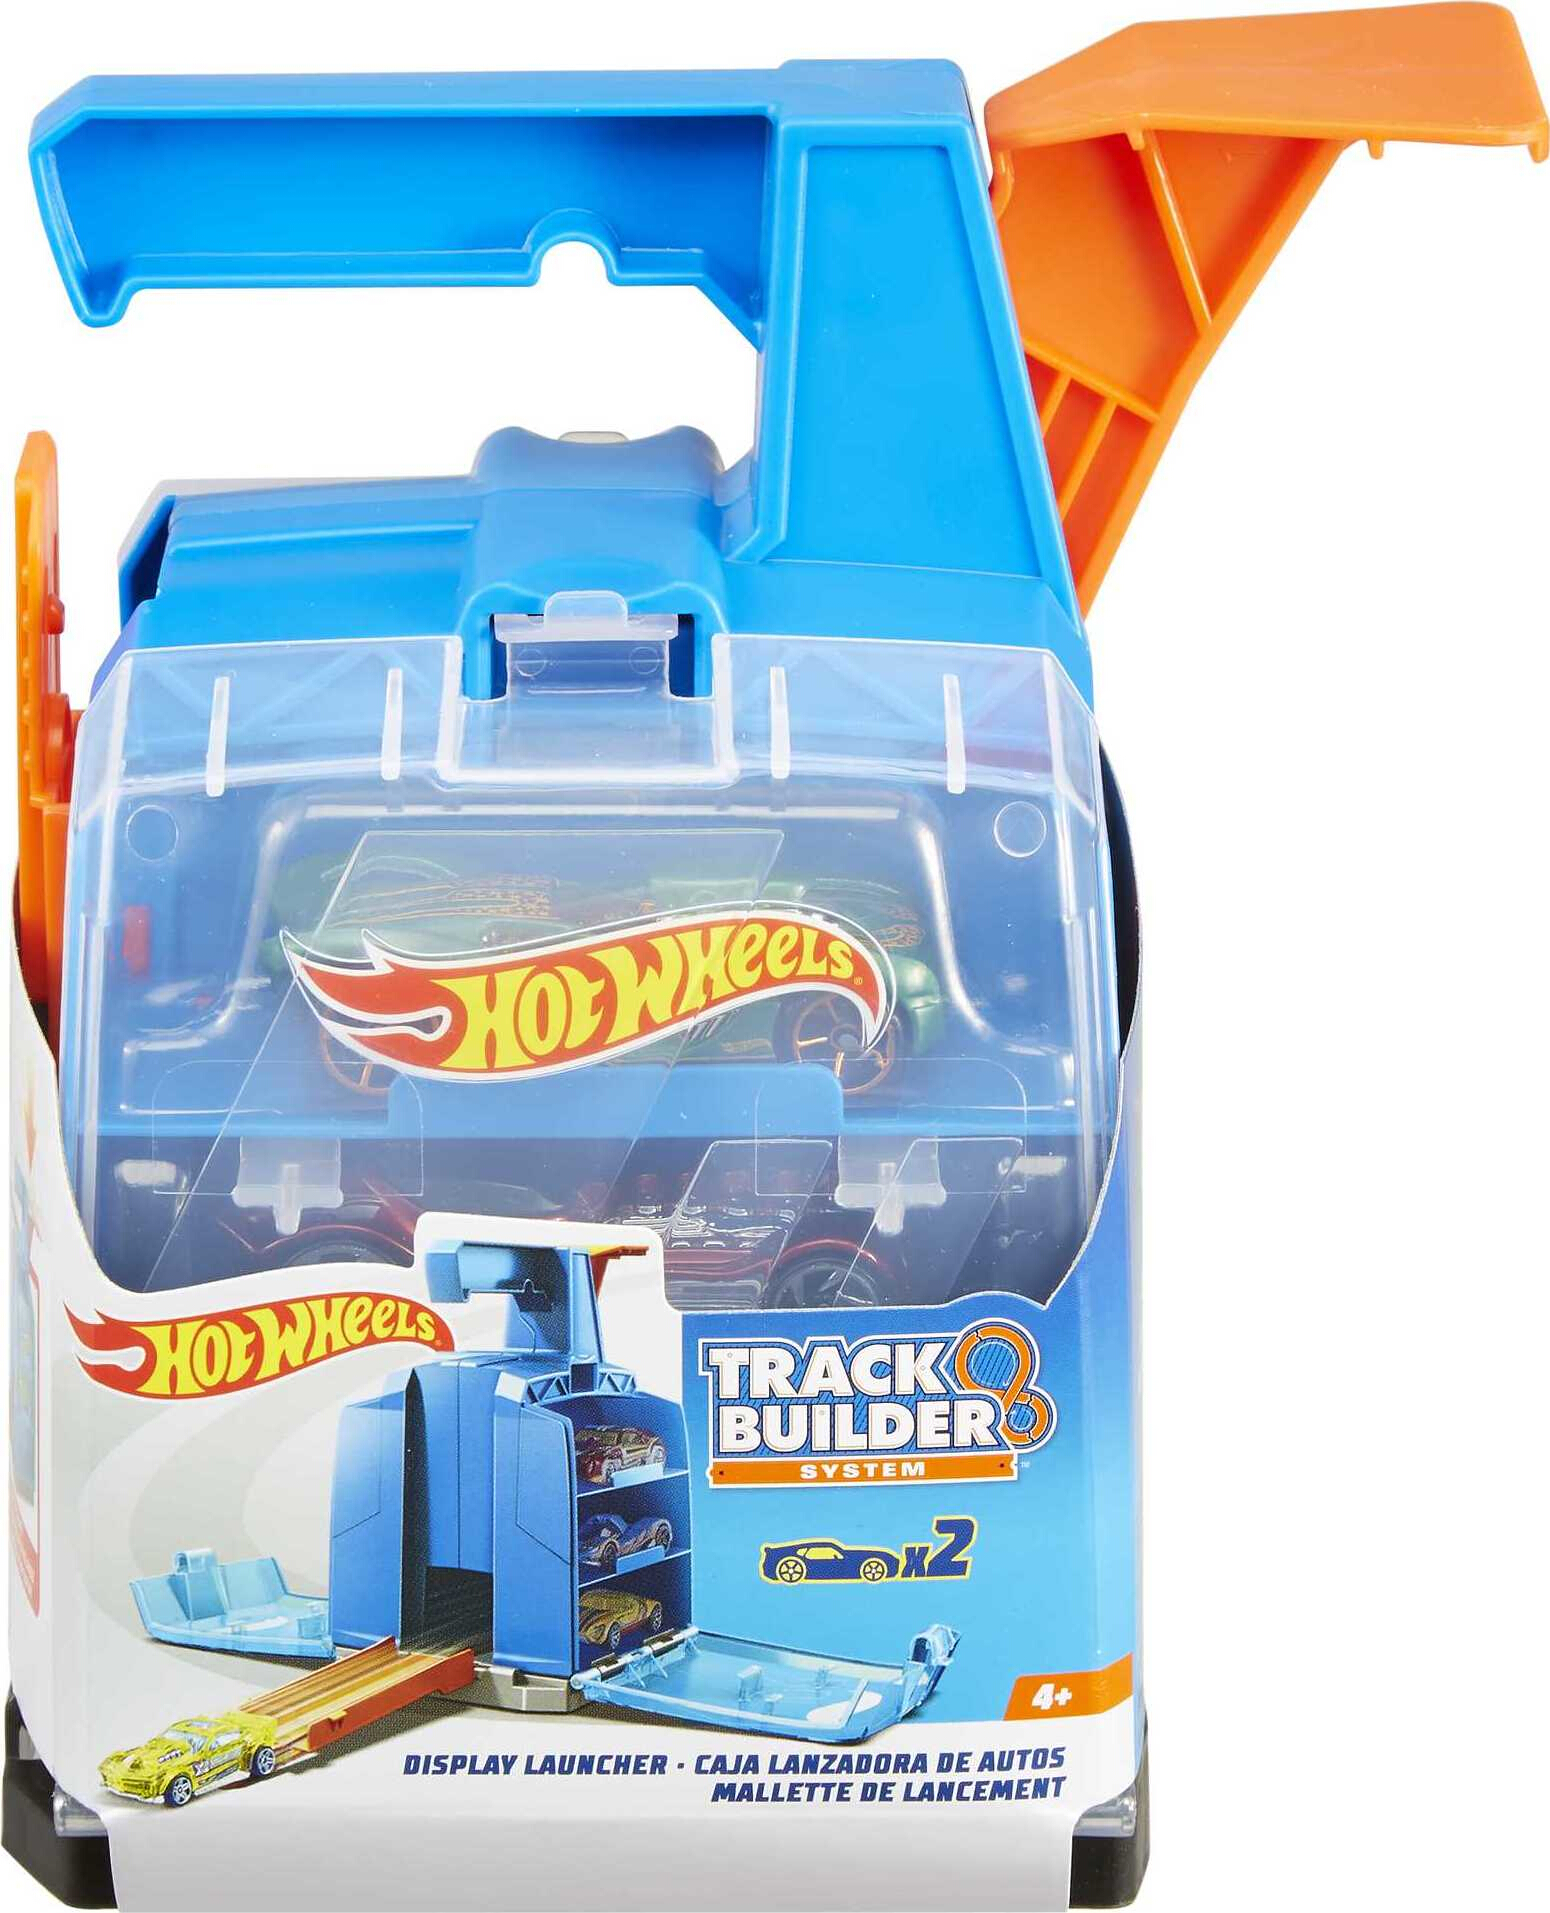 Hot Wheels Track Builder Display Launcher with 2 Toy Cars, Holds 6 1:64 Scale Vehicles - image 1 of 7